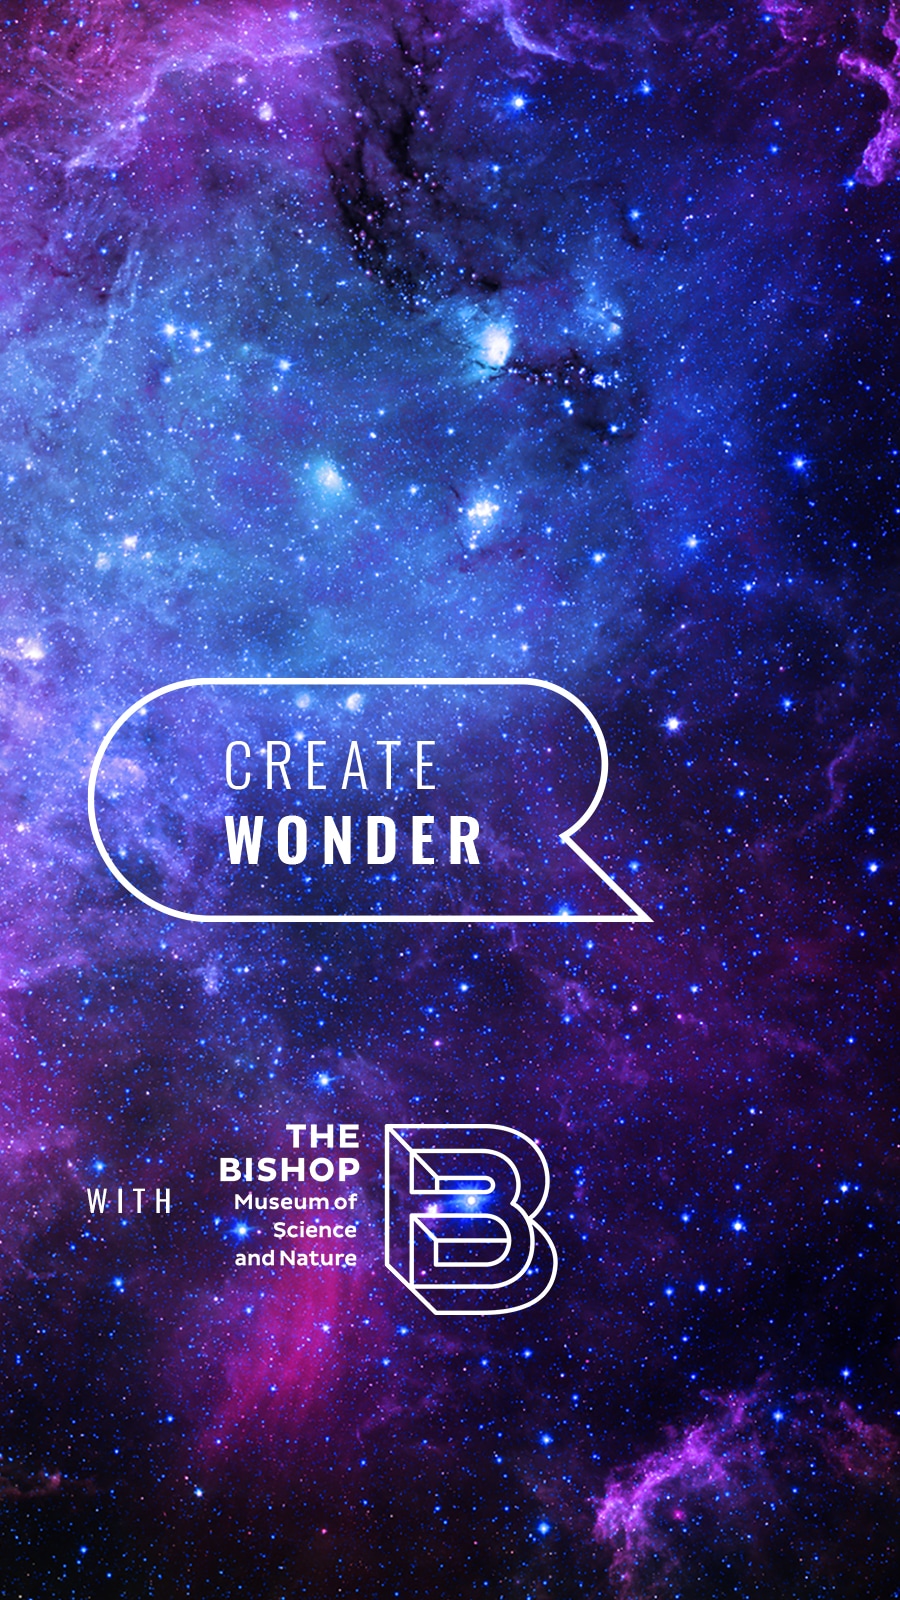 Create Wonder with The Bishop Museum of Science and Nature